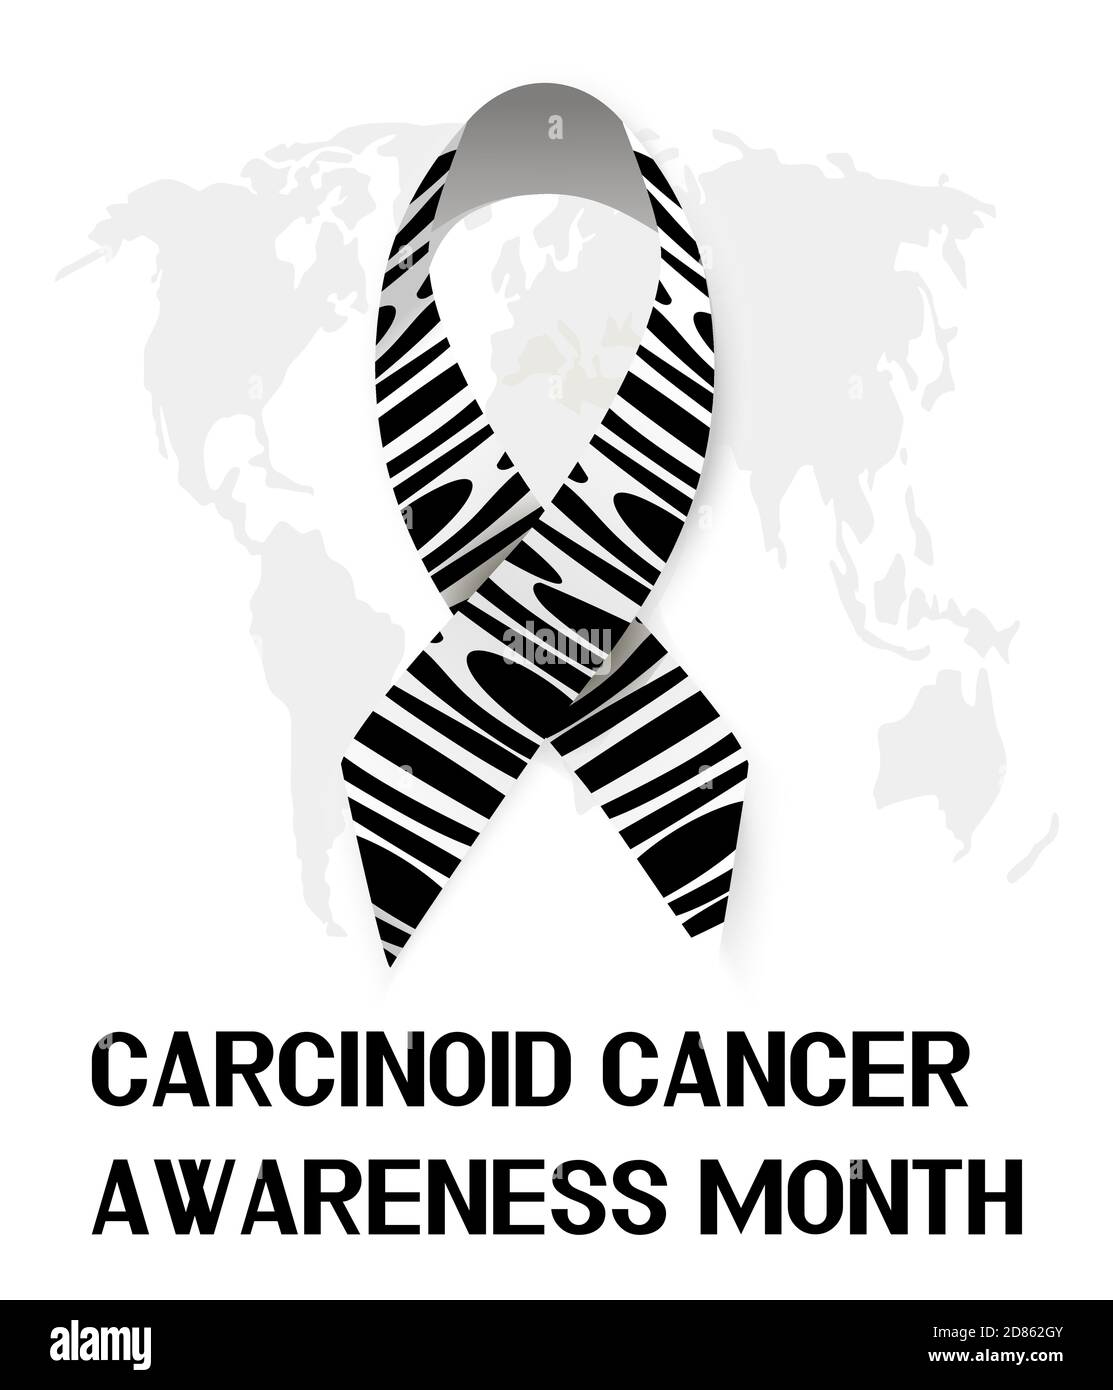 Carcinoid Cancer Awareness Month concept vector for medical website, blog. Event is celebrated in November. Ribbon is shown on the banner with text. Stock Vector